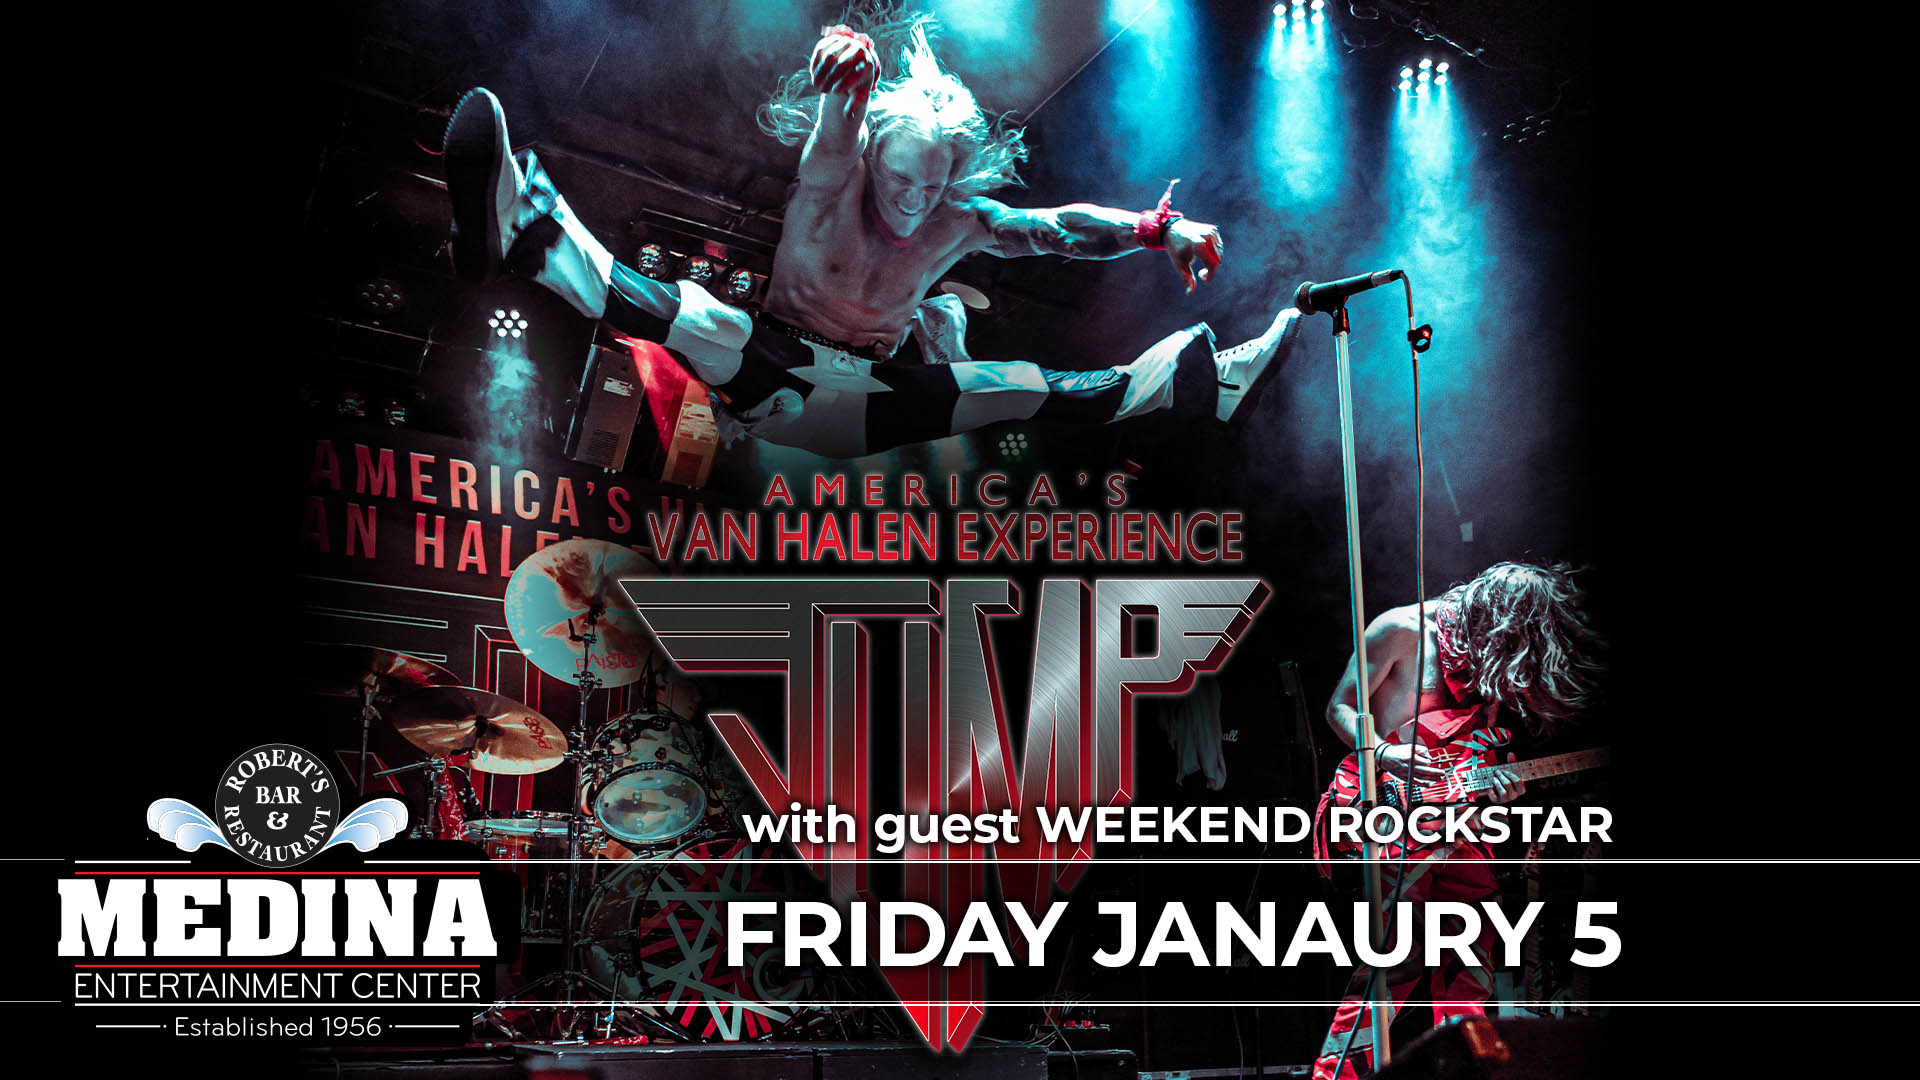 America's Van Halen Experience JUMP with guest Weekend Rockstar Medina Entertainment Center Friday, January 5, 2024 Doors: 7:30 PM | Music: 8:00 PM | 21+ Tickets on-sale Friday, November 25 at 11am GA Ticket Prices: $17 Advance / $22 Day Of Show plus applicable fees